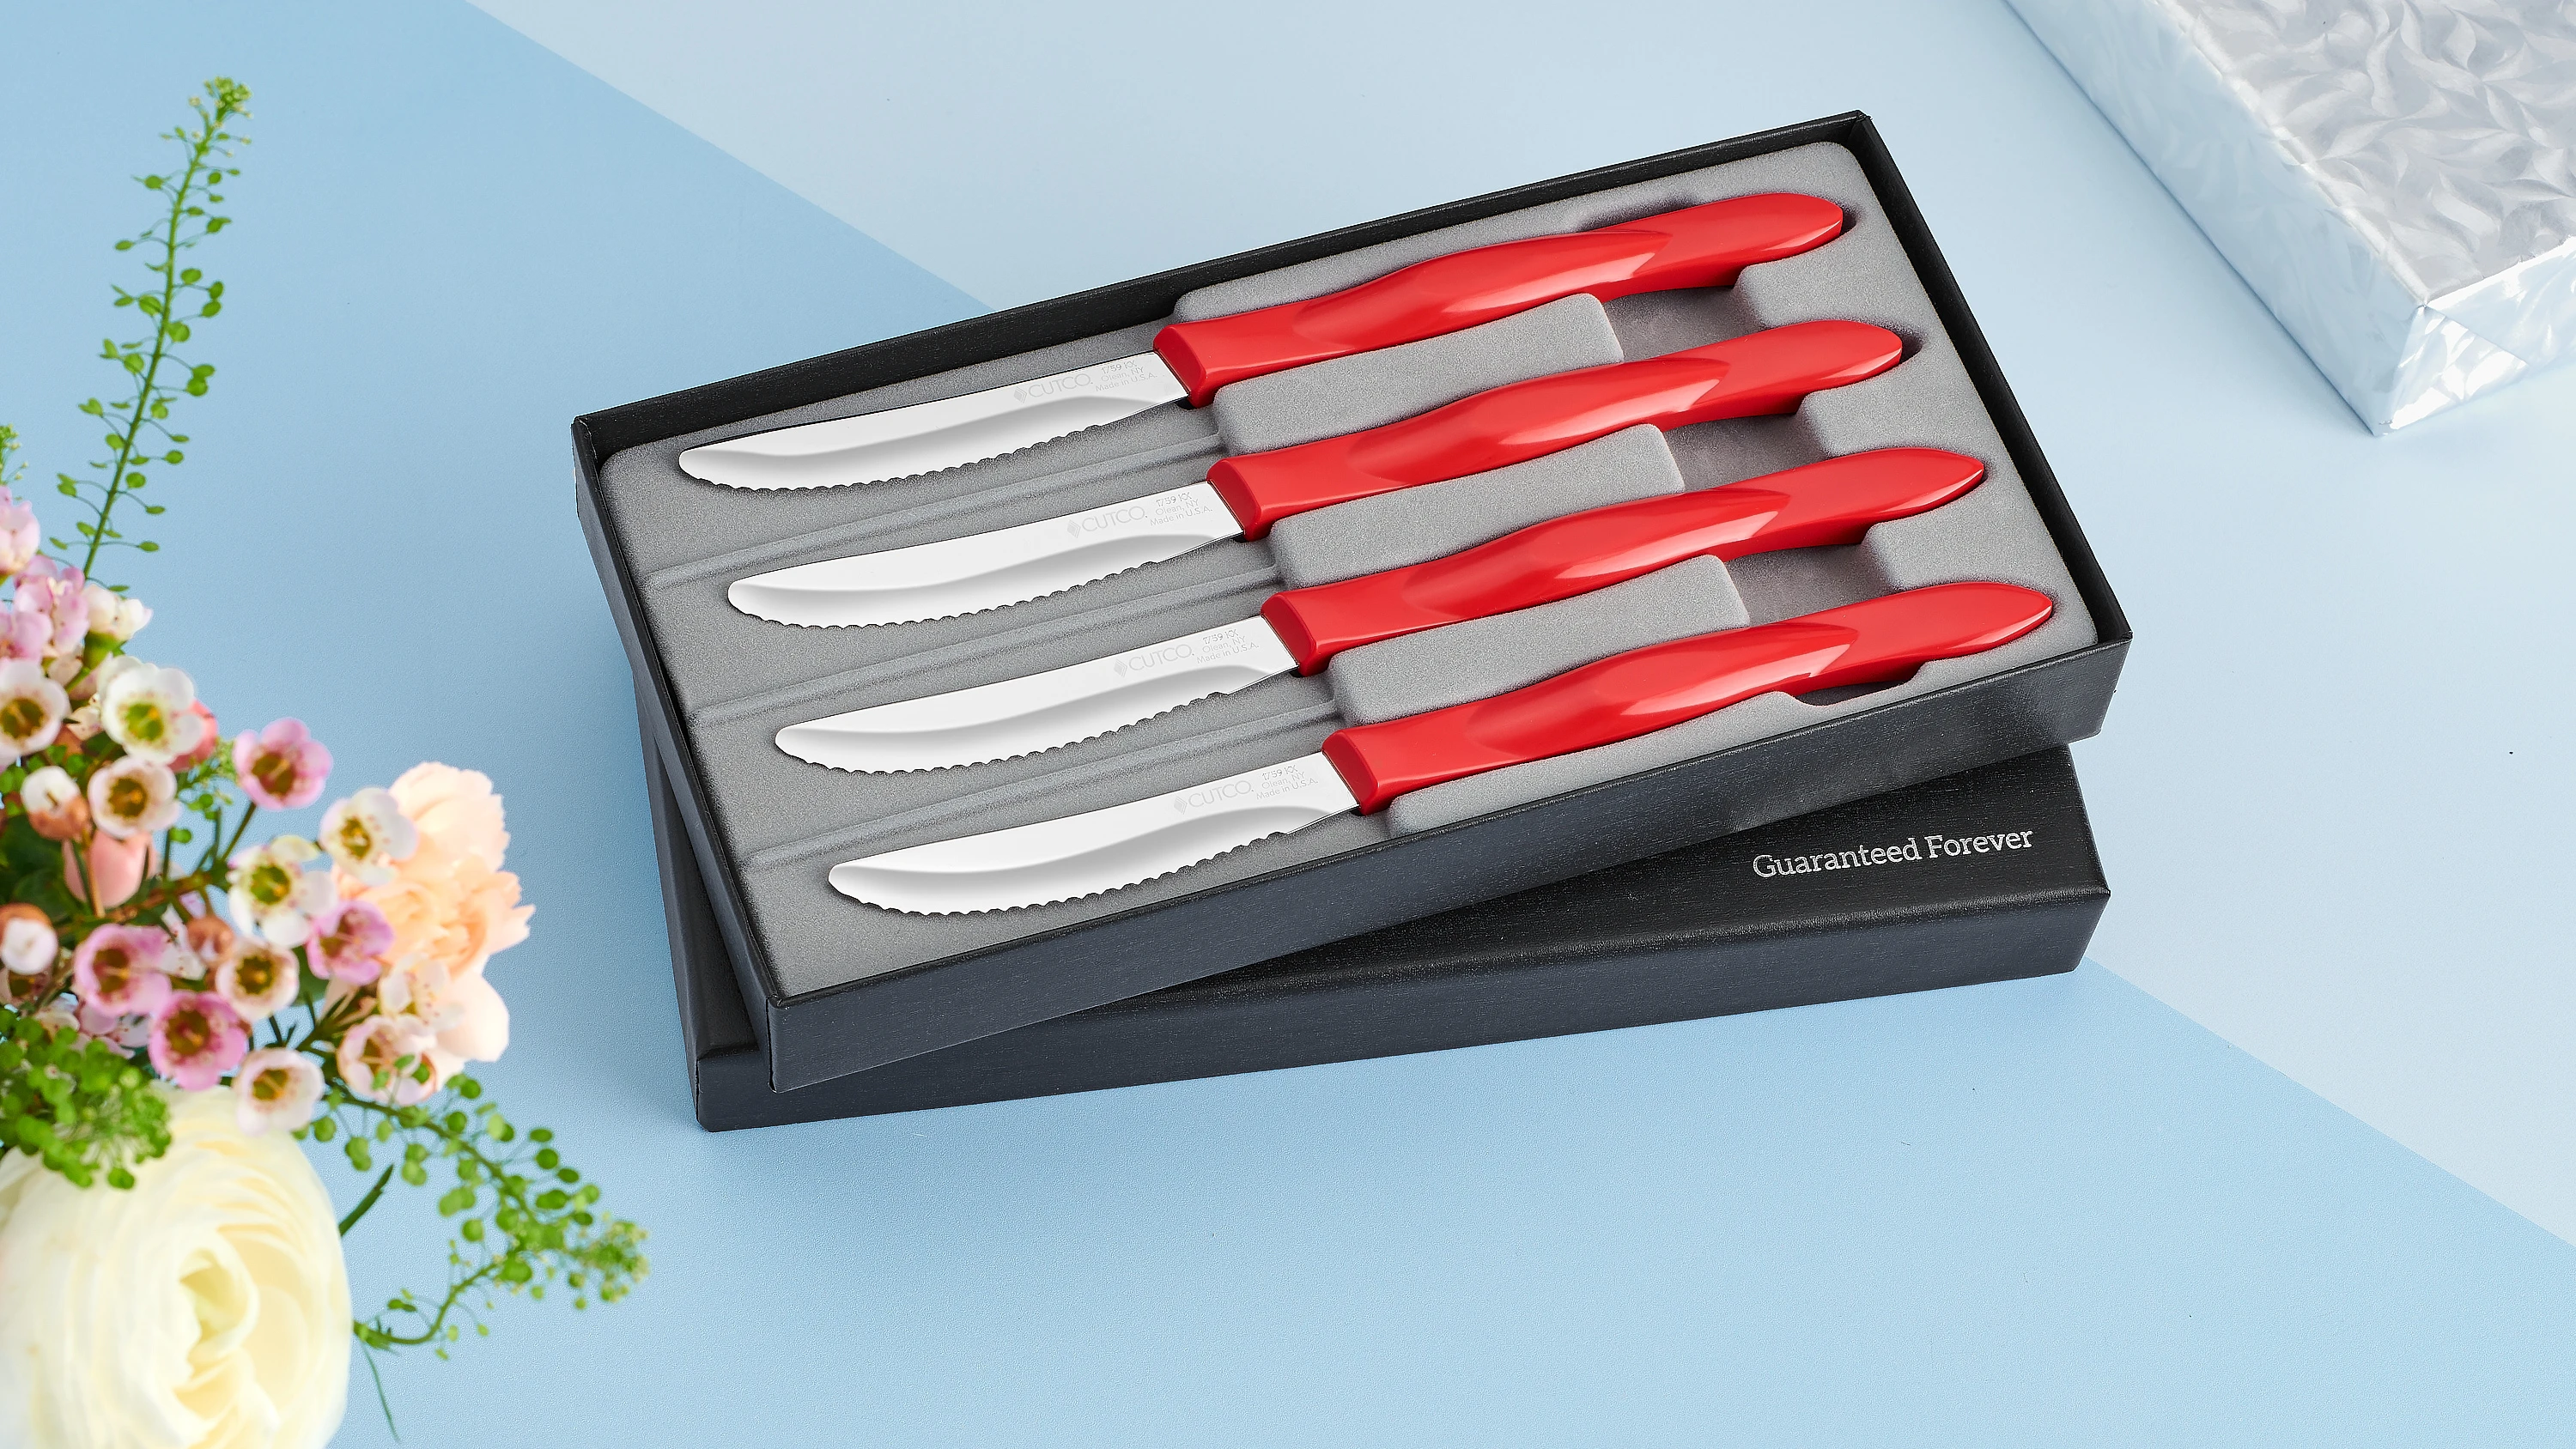 Cutco Table Knives Set of Four with Tray, Four of Cutcos Knife in a  Dishwasher-safe Tray, 8.4 Inch Long, 3.4 Inch Double-D Serrated Edge Blades  with 5